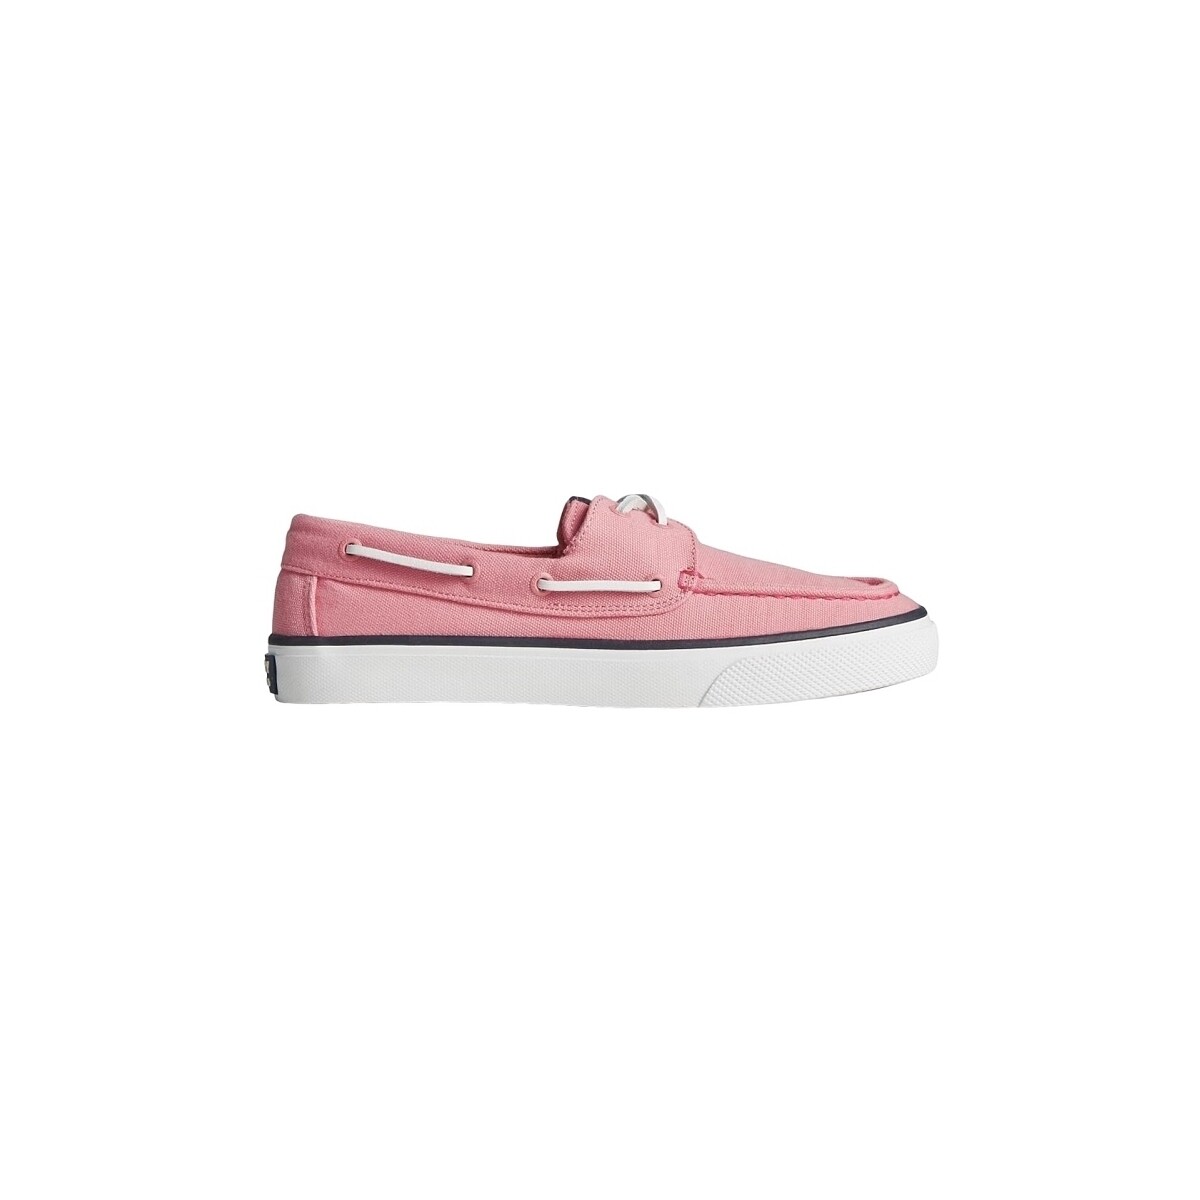 Scarpe Donna Sneakers Sperry Top-Sider BAHAMA 2.0 Rosa